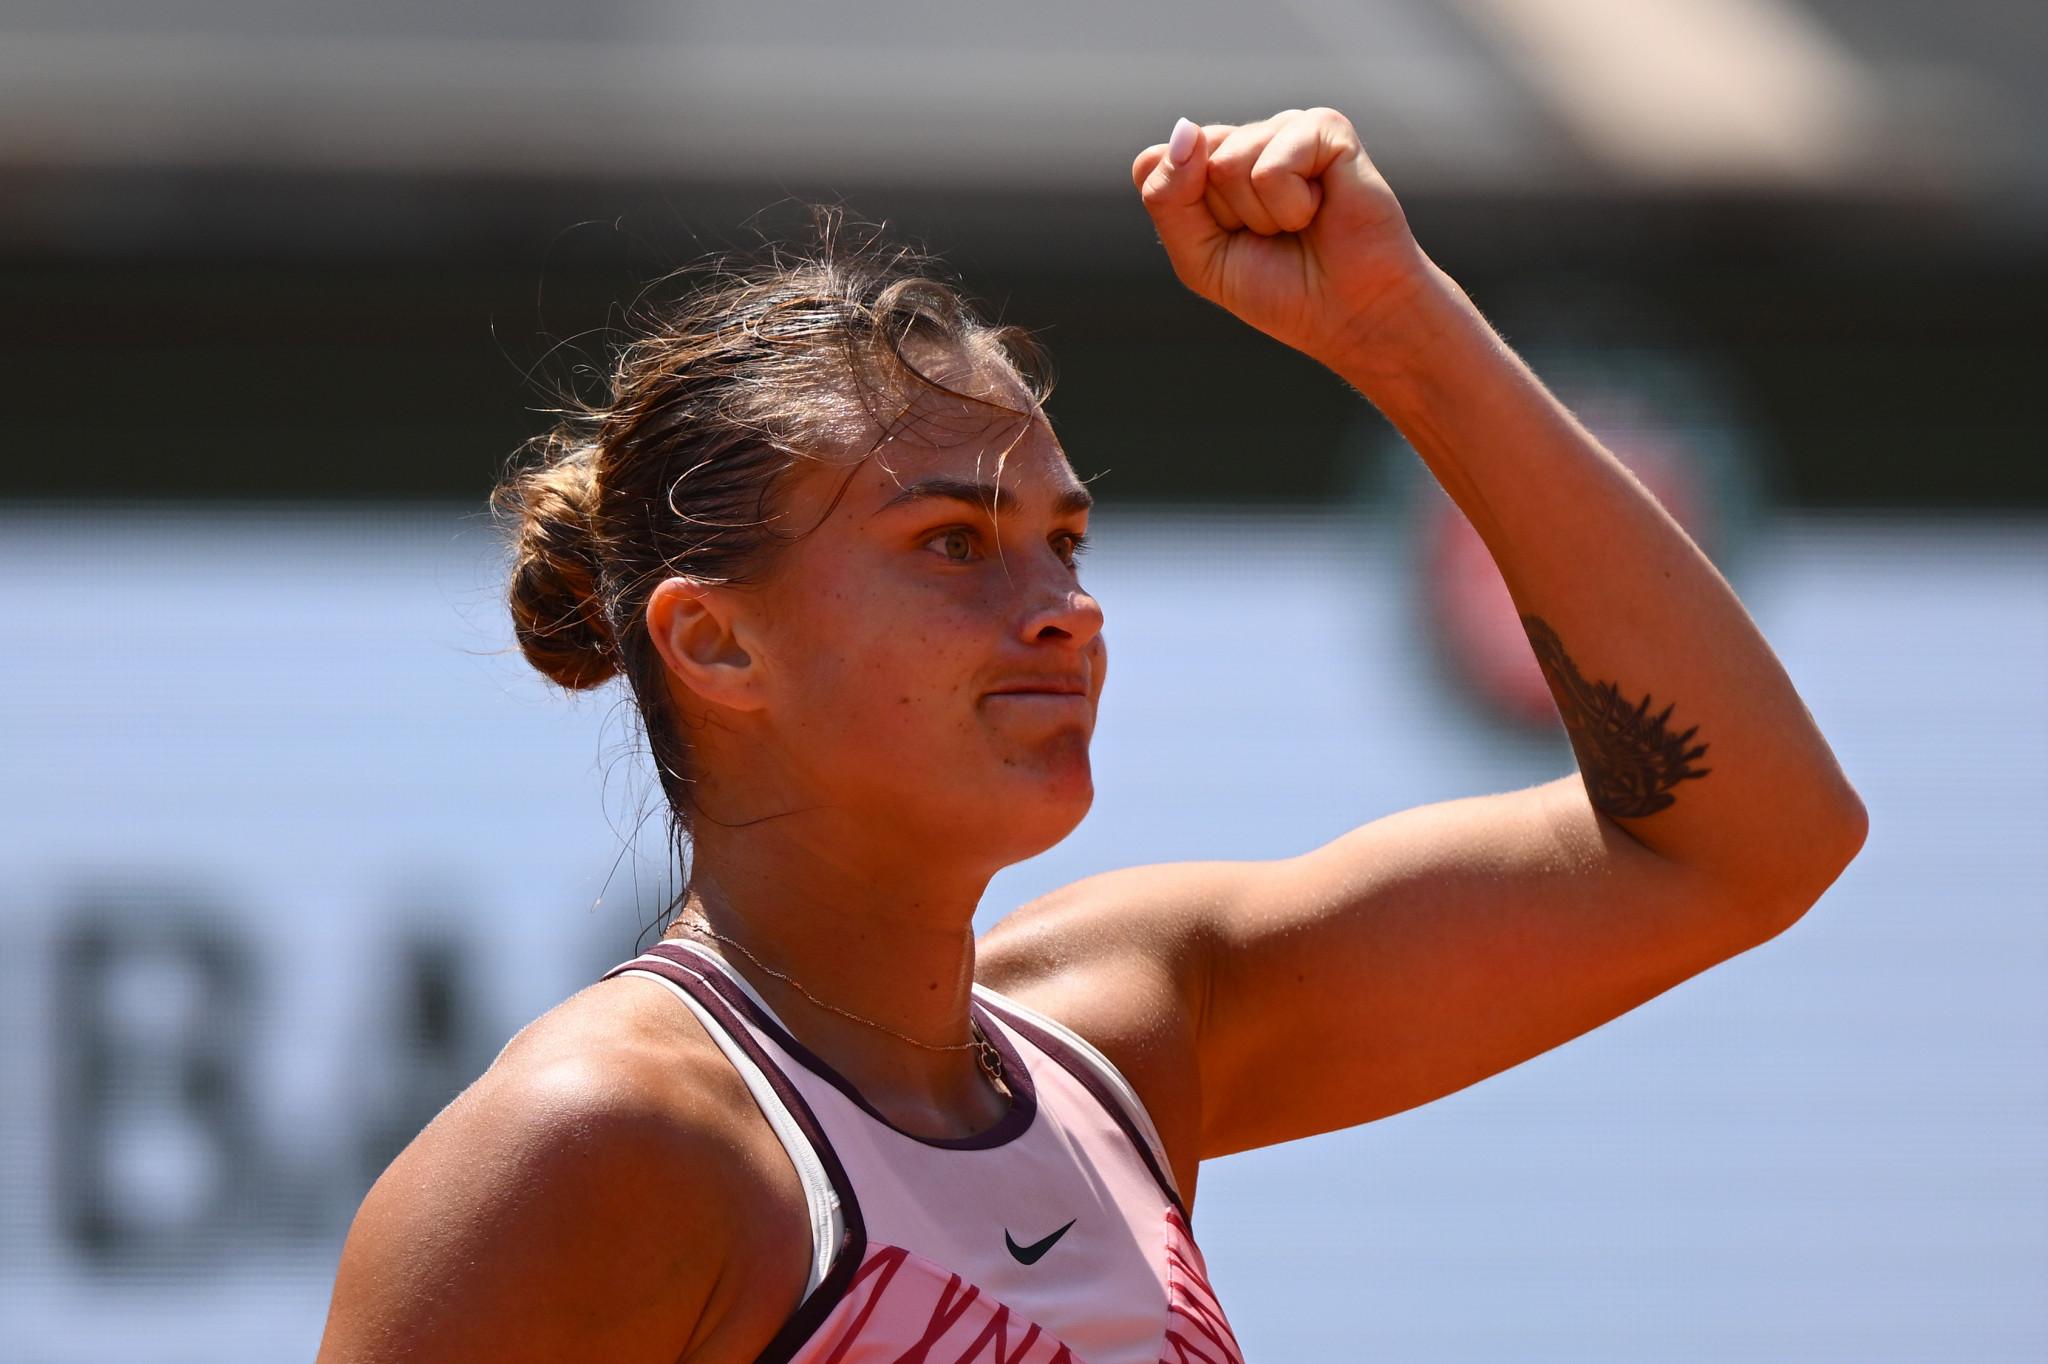 Sabalenka does not support Lukashenko "right now" after resuming media duties at French Open